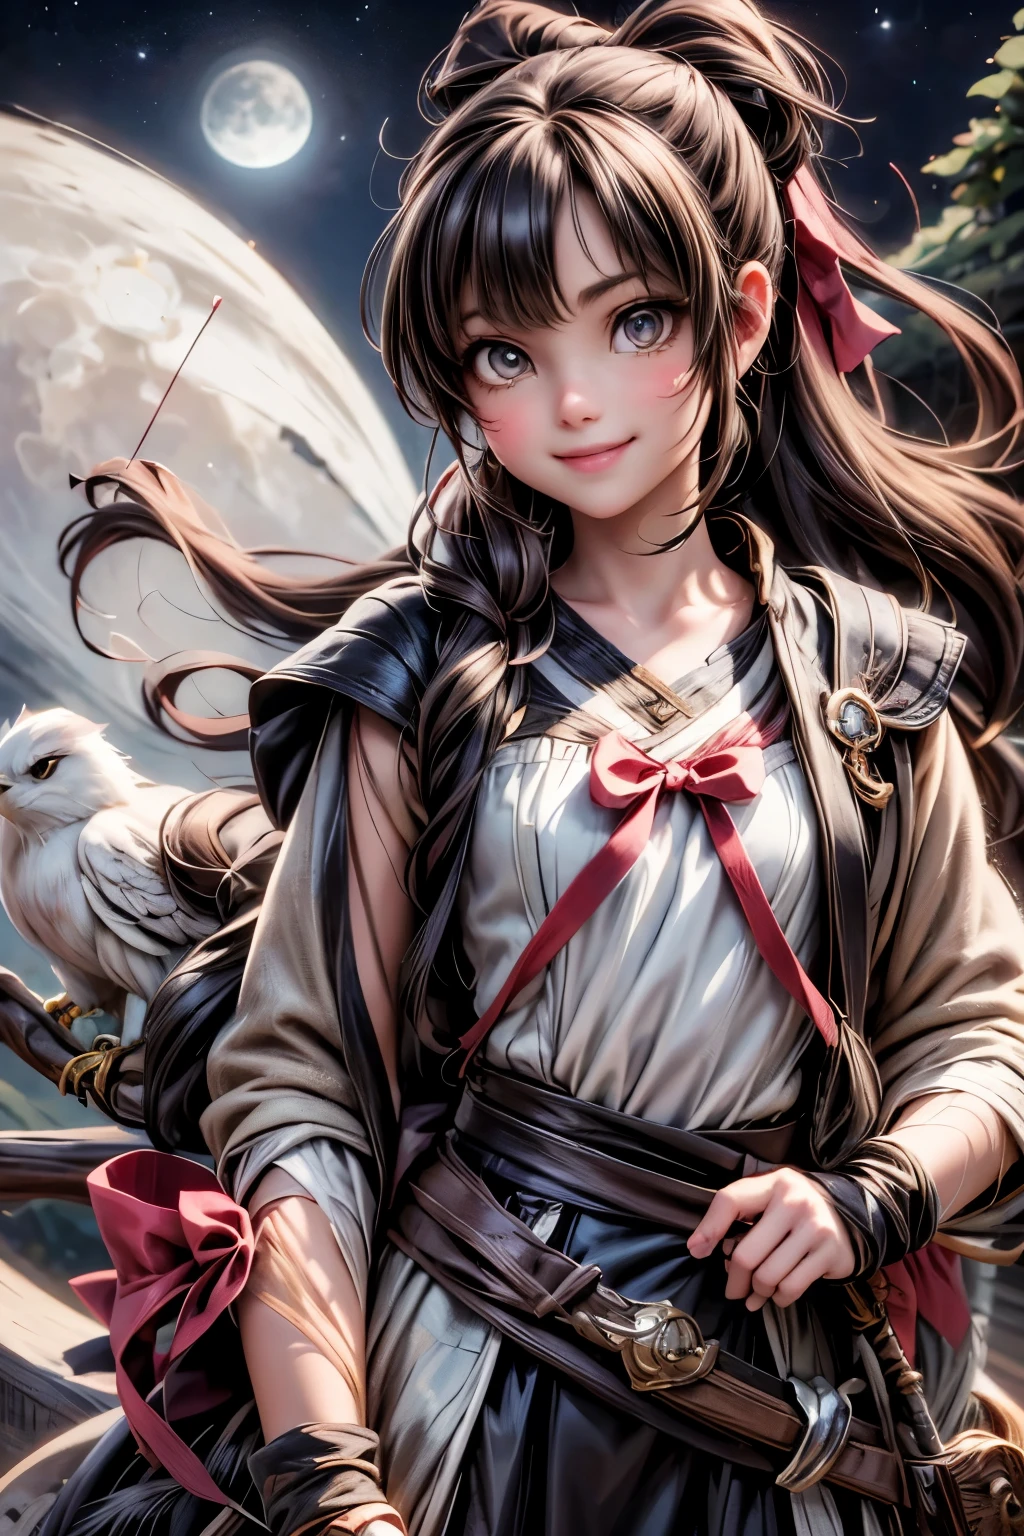 a cut archer girl smiling ((holding a bow)), a falcon perched on the bow, fantasy art style, at night, nighs scenery, moon, starry sky